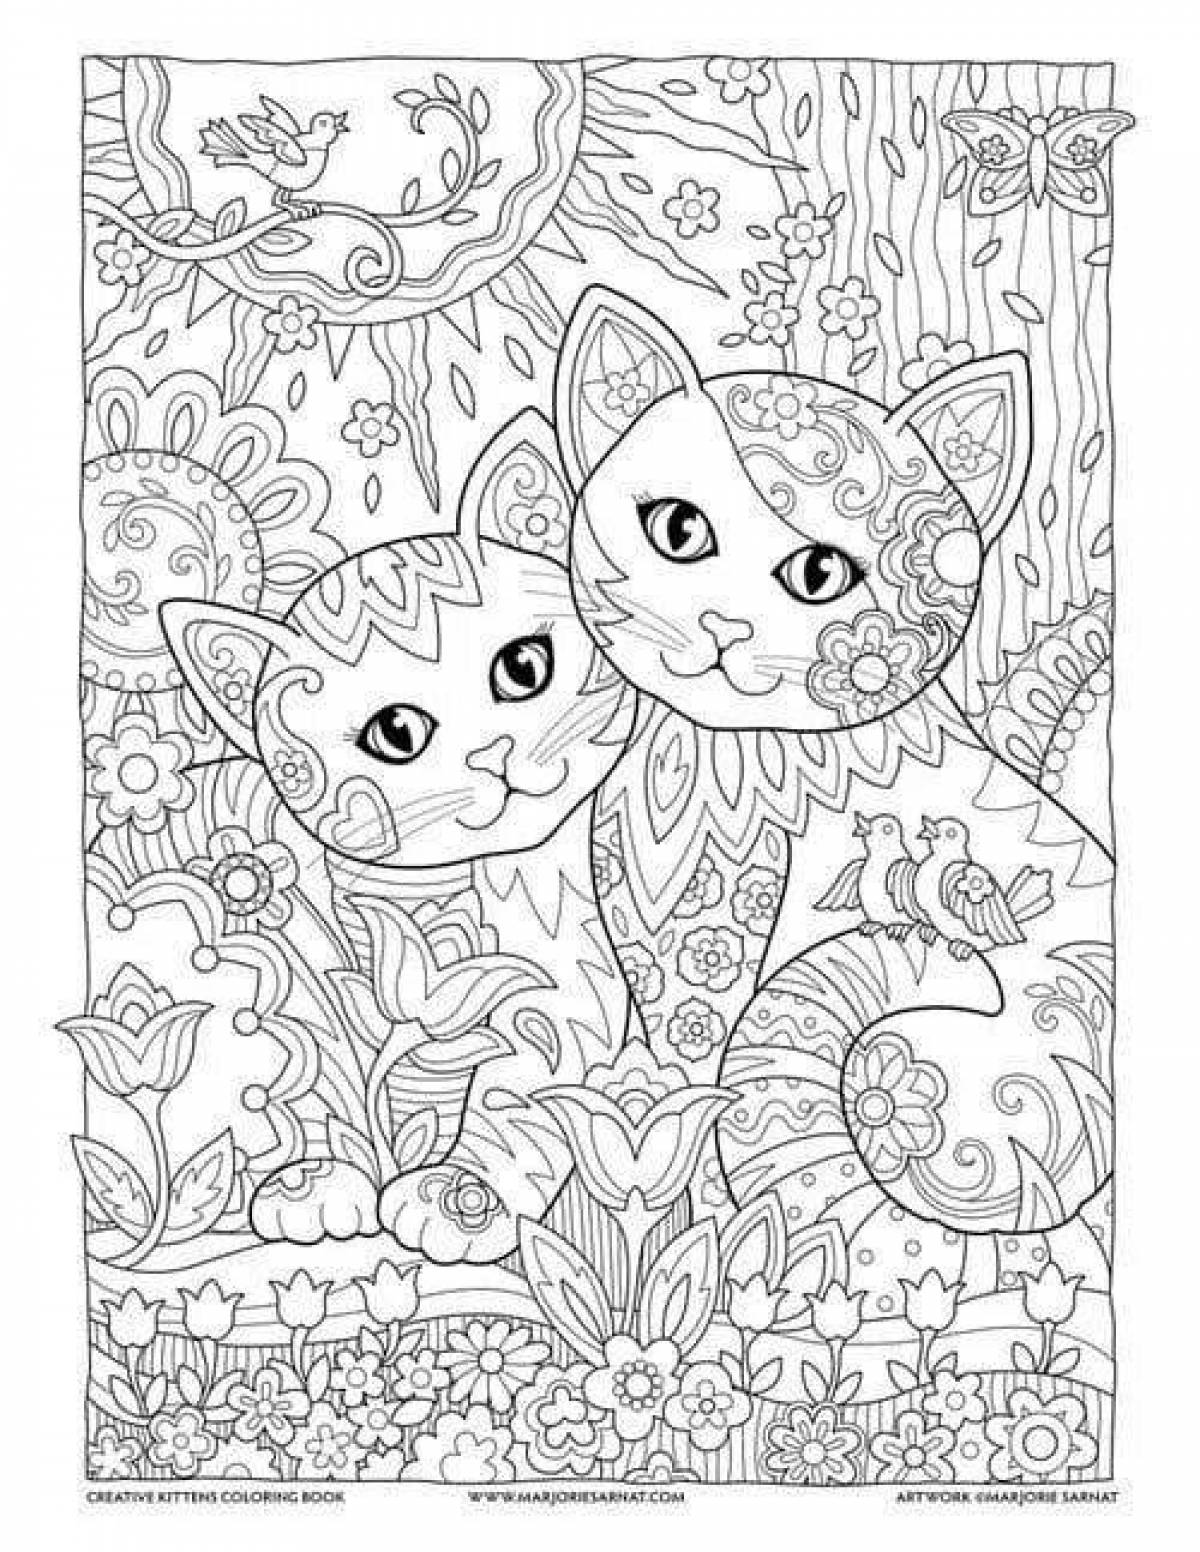 Comforting cat therapy anti-stress coloring book